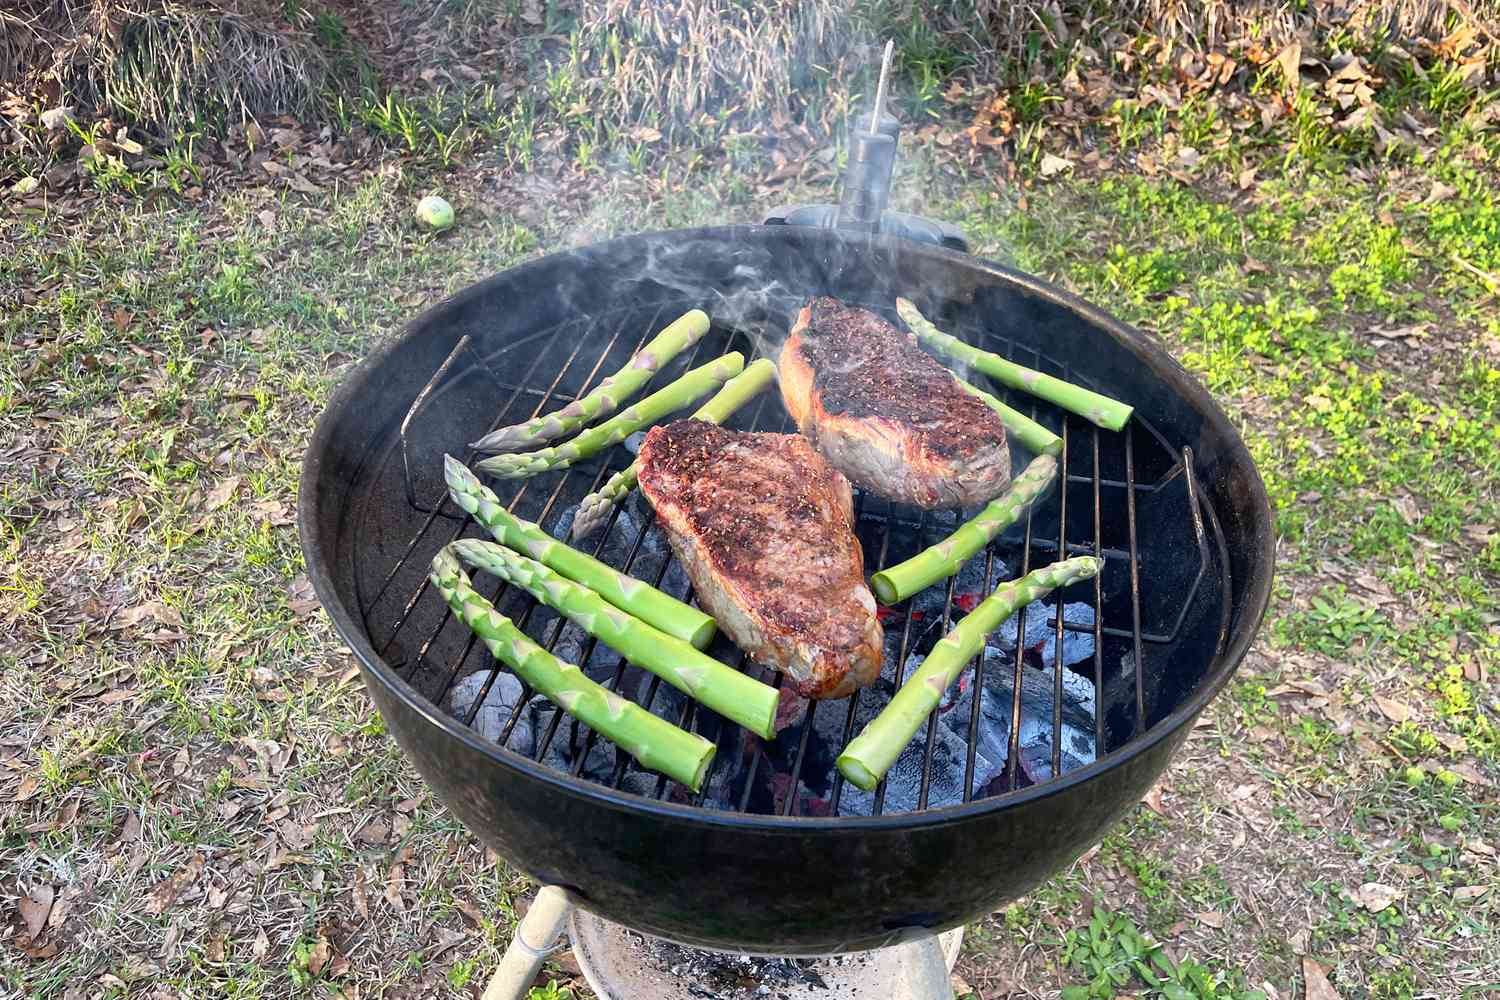 Steak and asparagus cooking on the grill over FOGO Super Premium Oak Restaurant All-Natural Hardwood Lump Charcoal